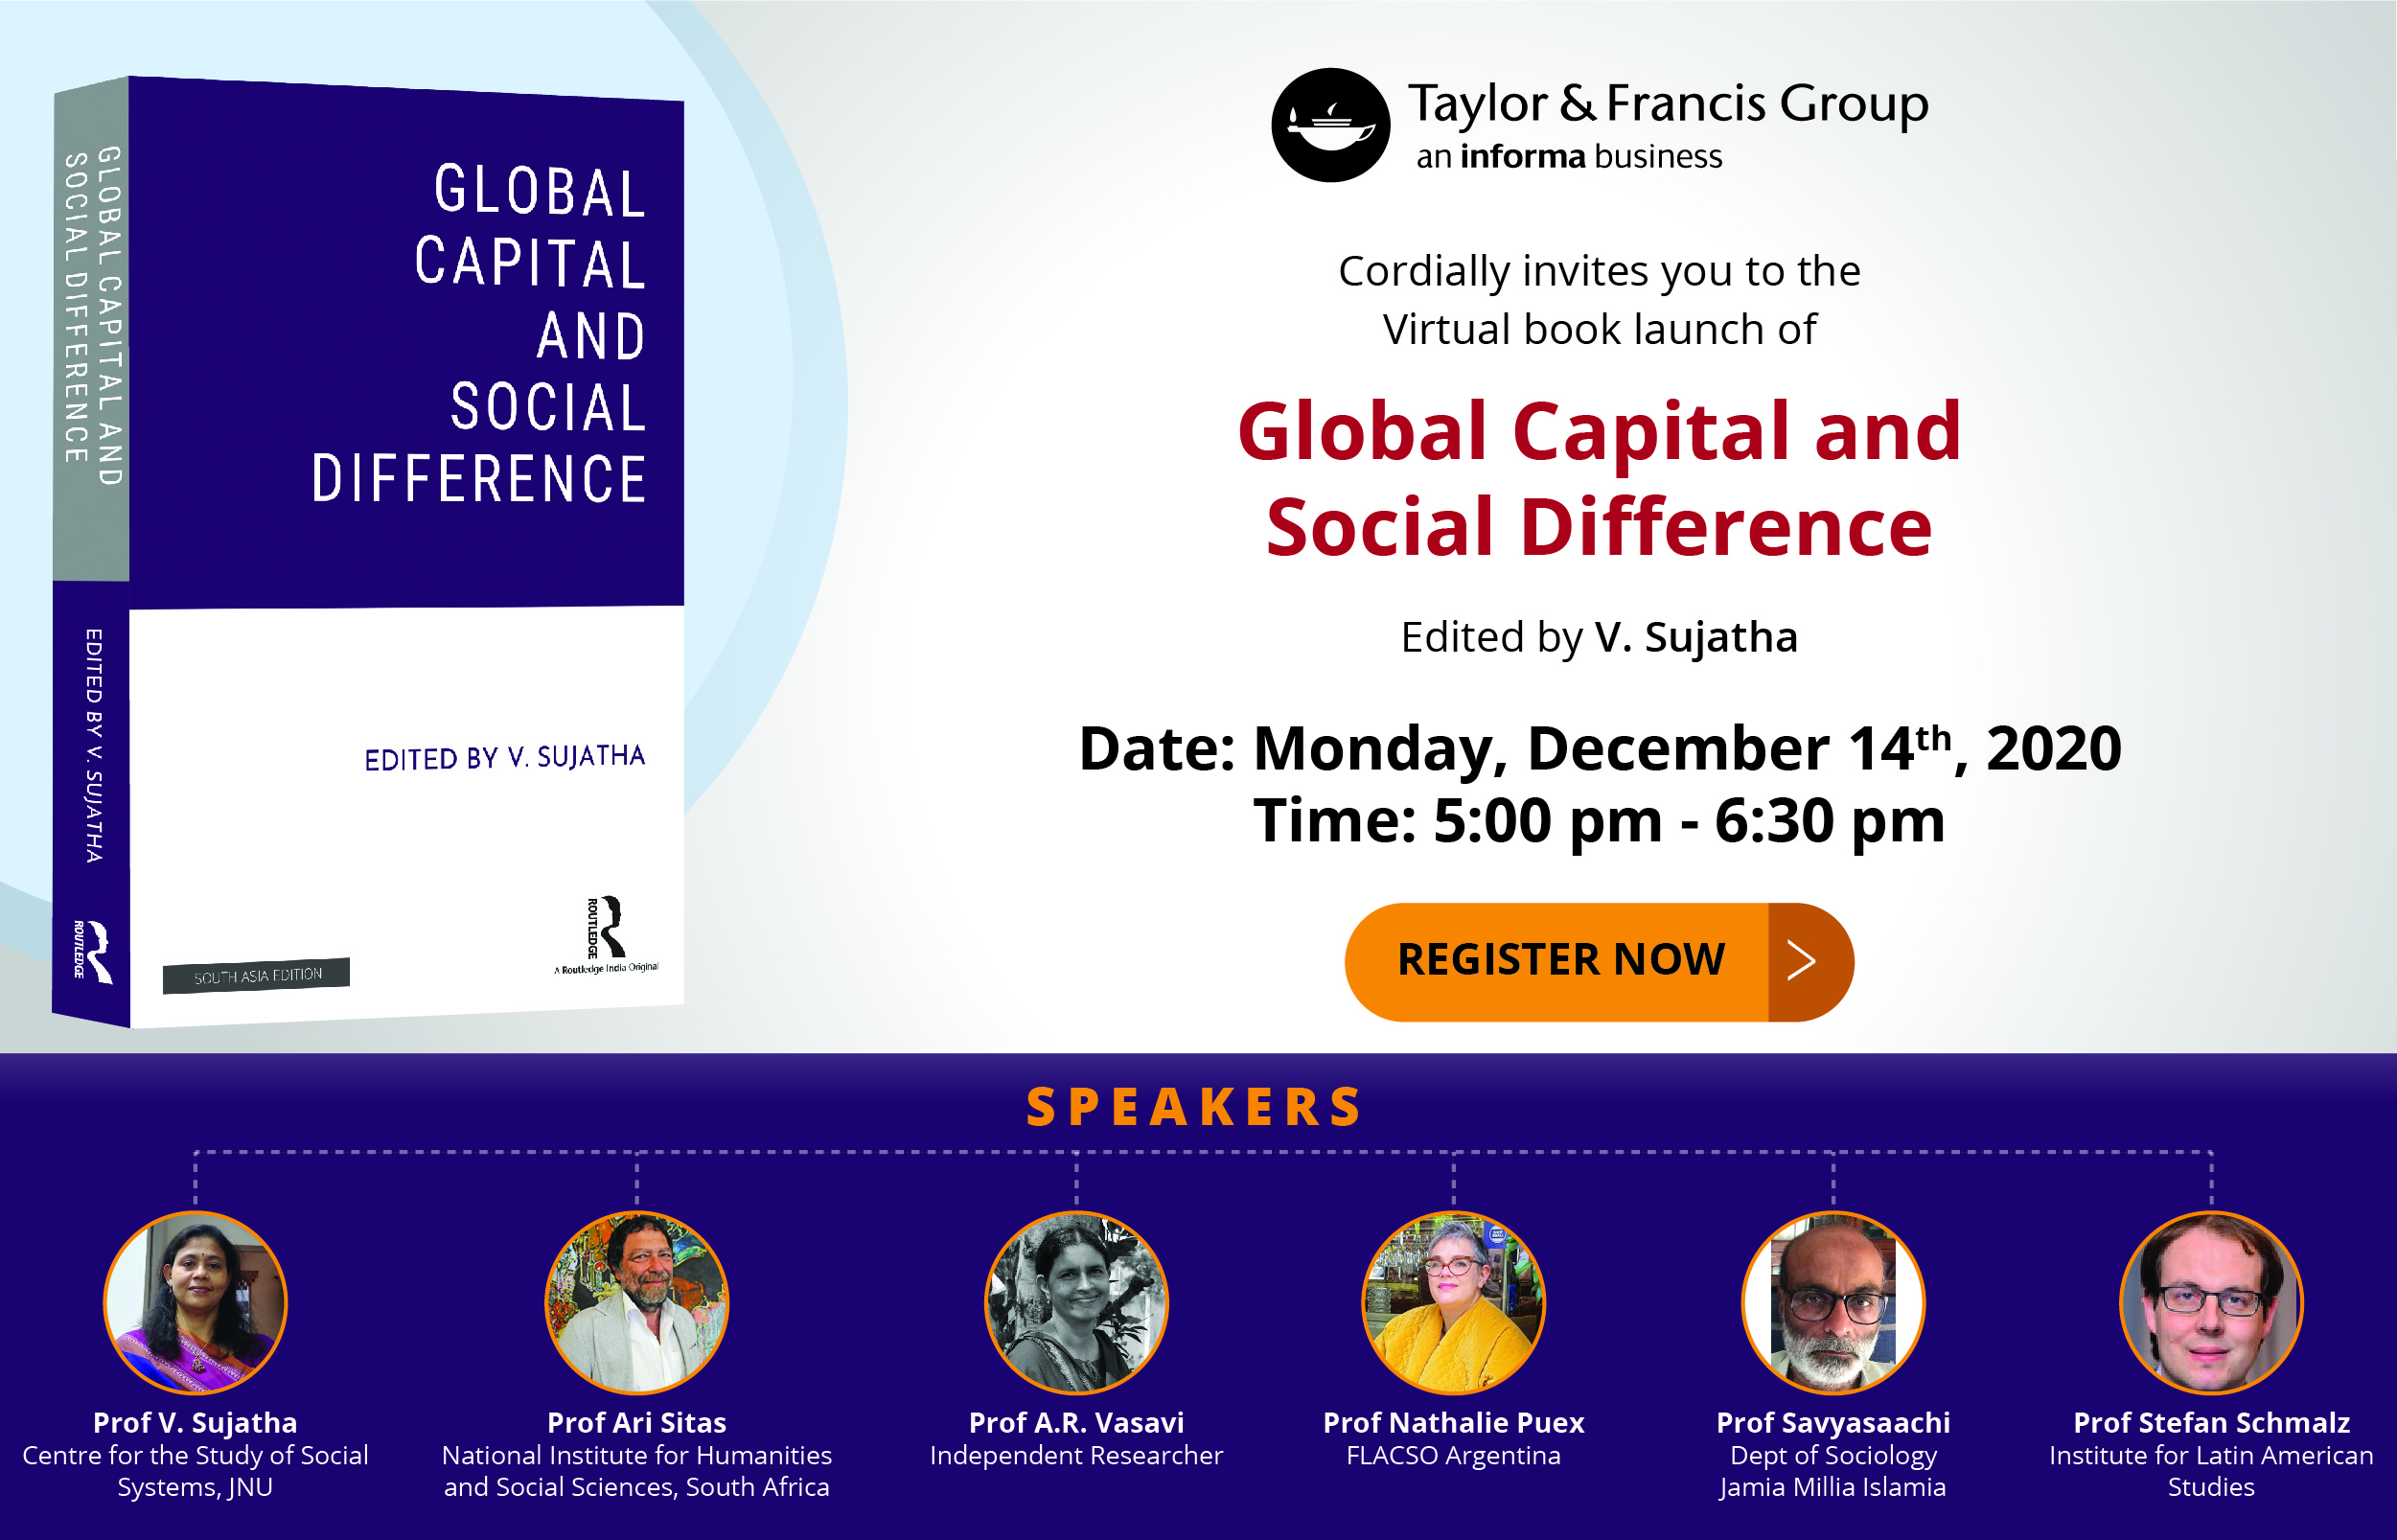 Virtual Book Launch of "Global Capital and Social Difference"